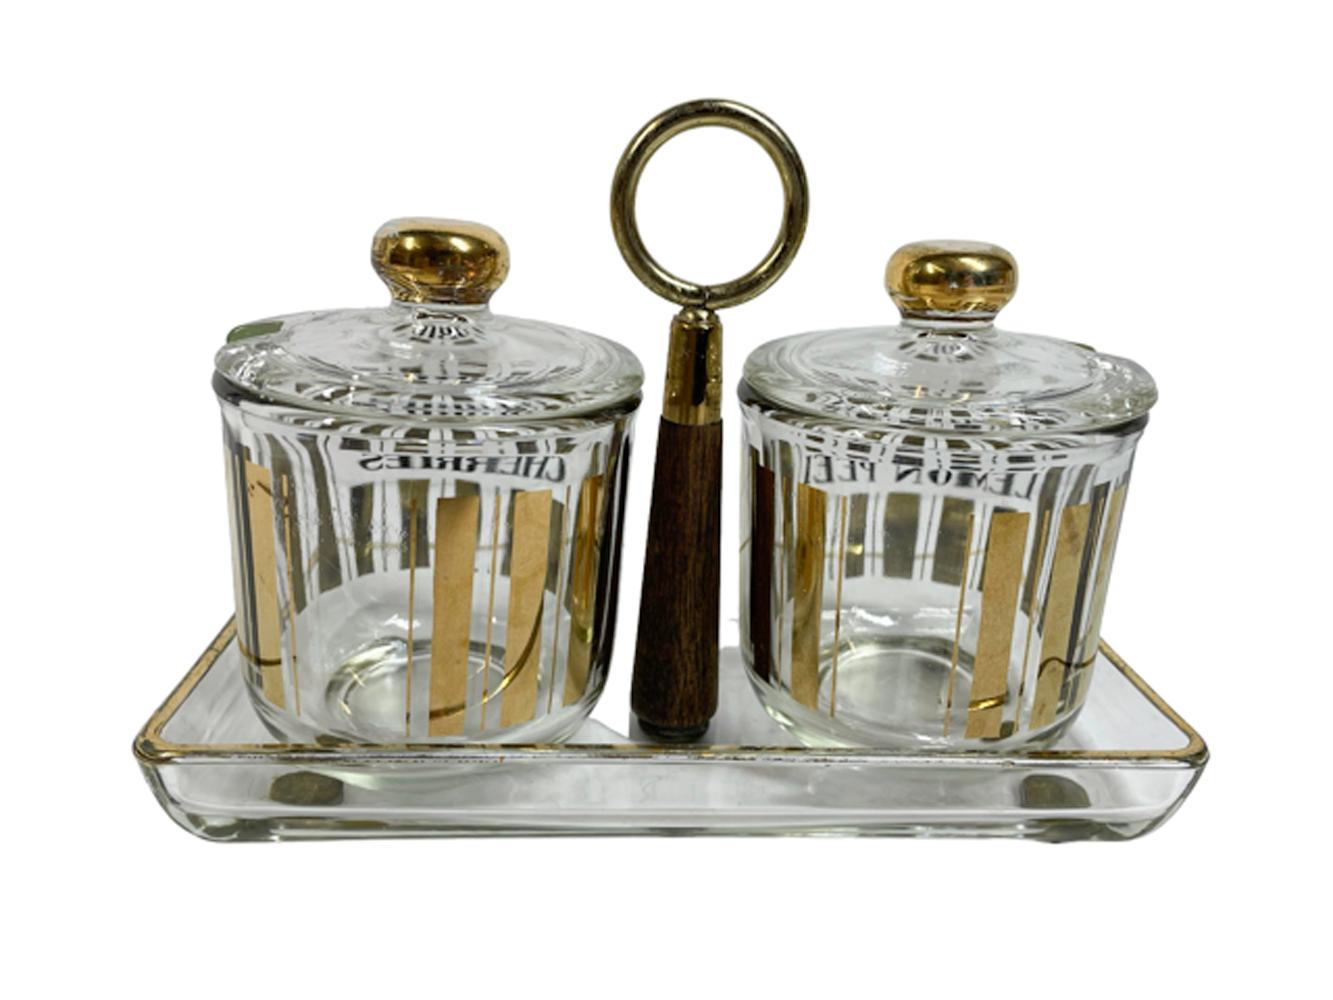 Hard to find, pair of mid-century modern garnish jars in a rectangular glass tray with central metal ring toped wood handle. the jars decorated with gold vertical bars and labeled in black for 